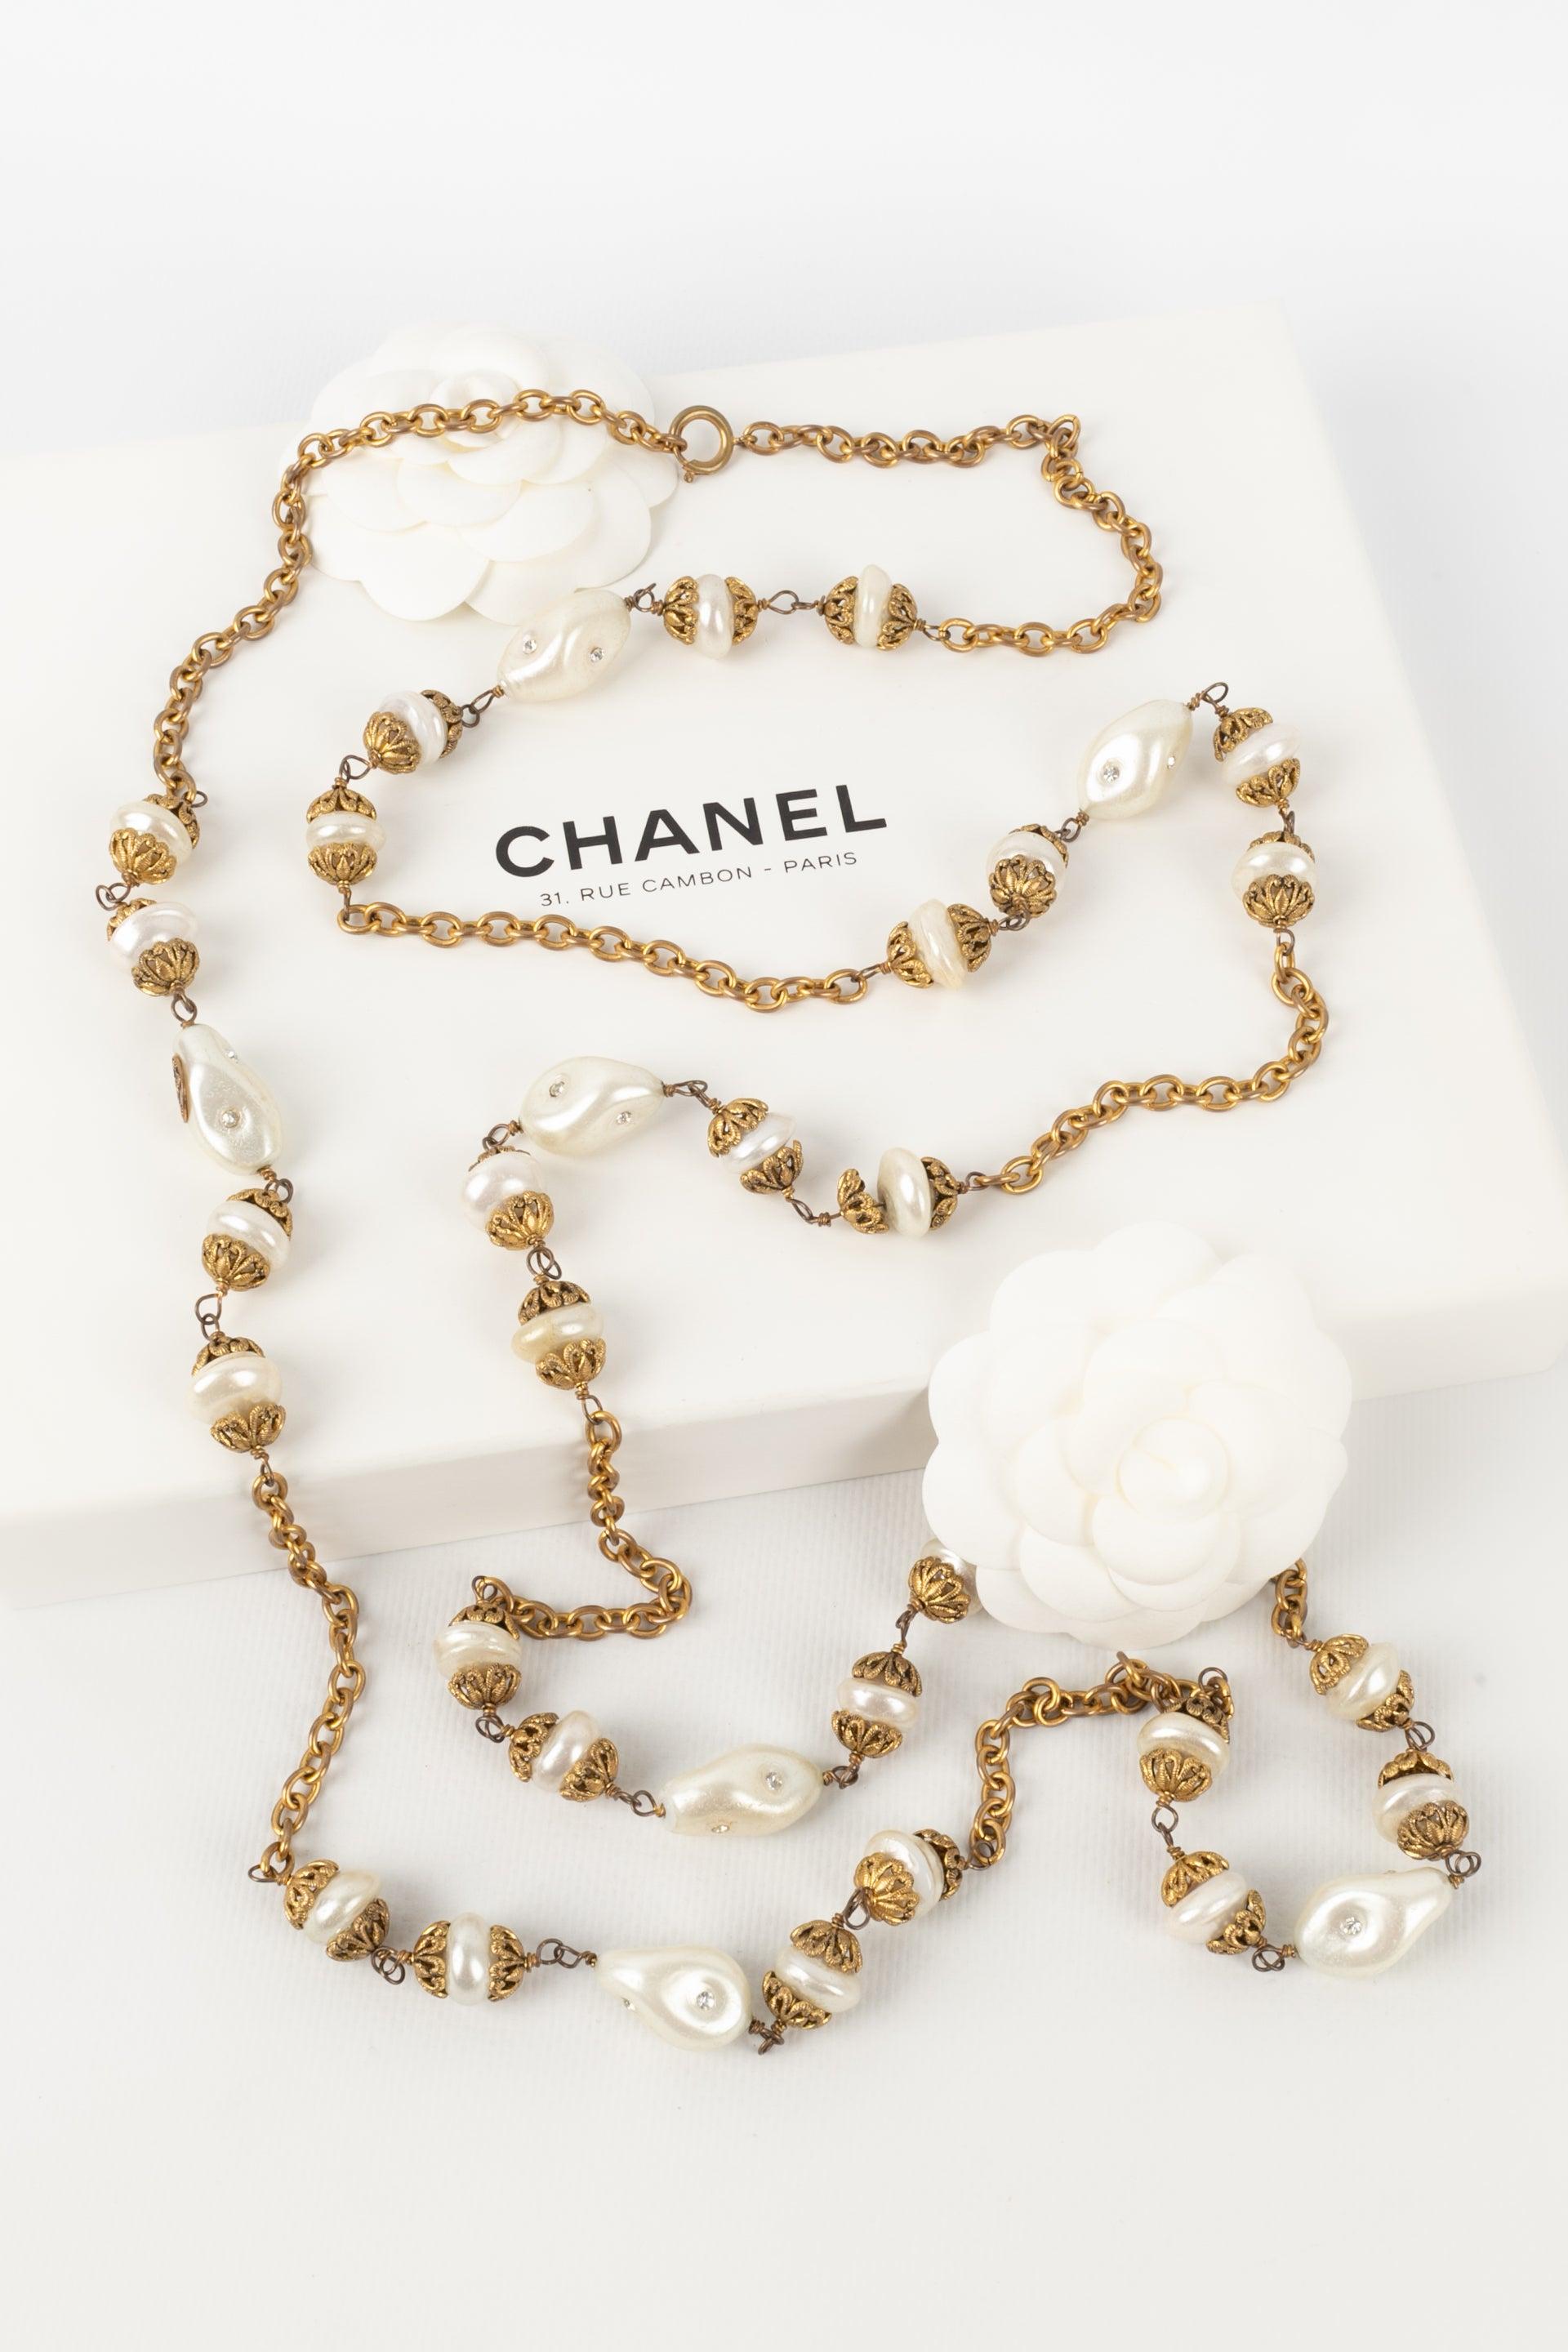 Chanel Golden Metal Sautoir with Costume Pearls and Swarovski Rhinestones, 1984 For Sale 4